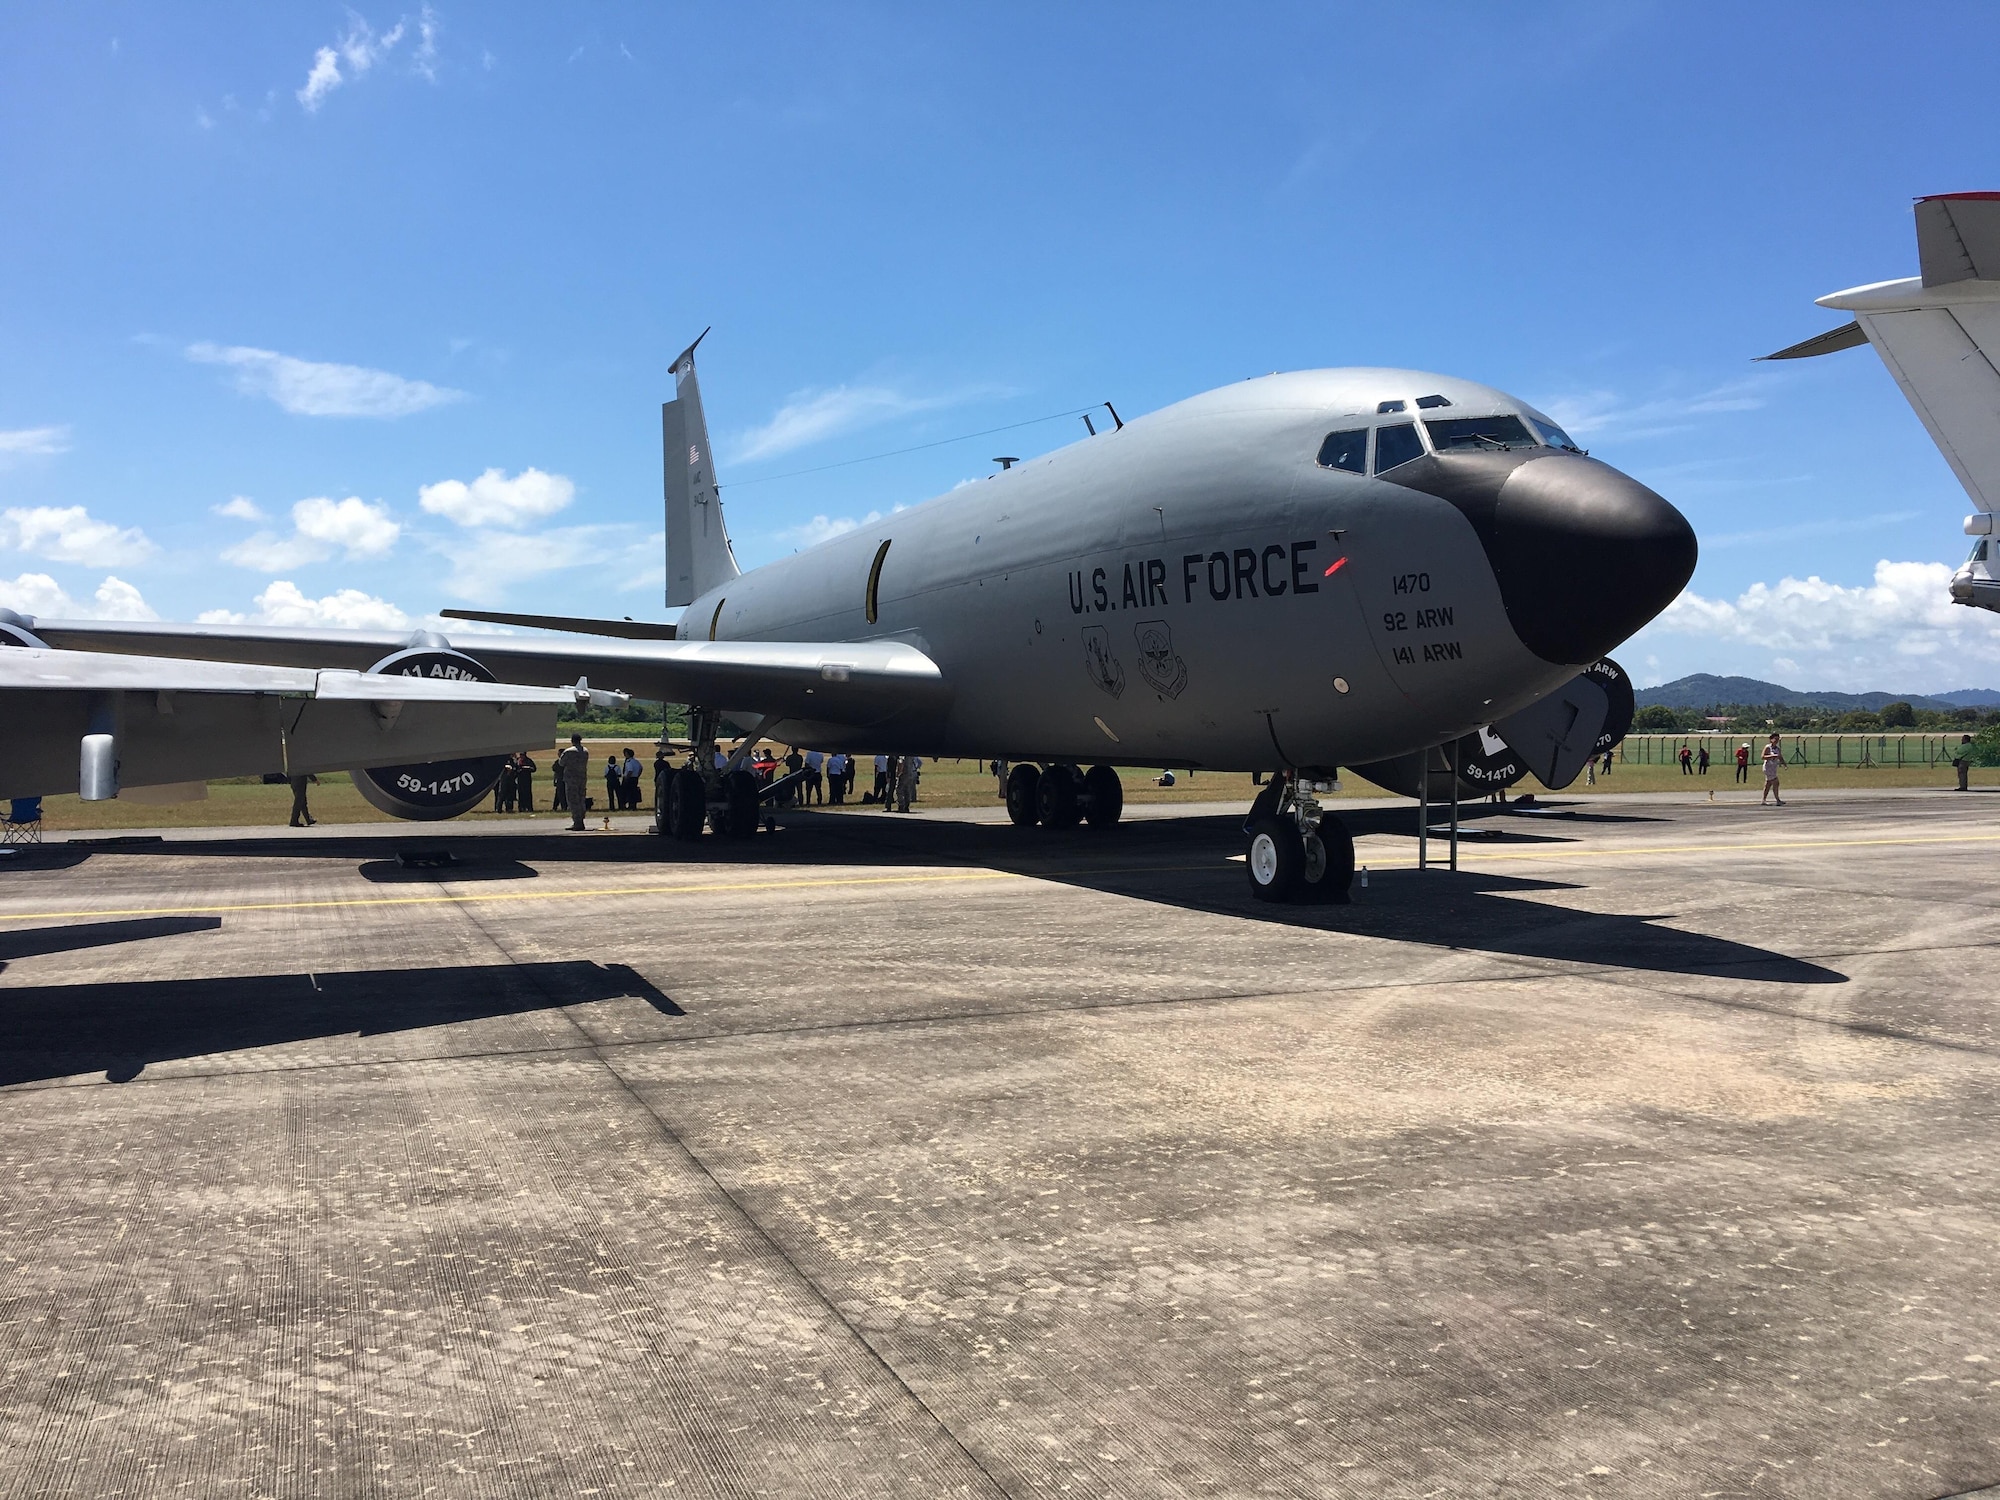 A U.S. Air Force KC-135 Stratotanker refueler with the 141st Air Refueling Wing of the Washington Air National Guard from Fairchild Air Force Base, Washington, is displayed during the Langkawi International Maritime and Aerospace Exhibition (LIMA) 2017 in Sirat, Malaysia, March 21, 2017. Events such as LIMA contribute to increased interoperability and security throughout the Indo-Asia-Pacific region. LIMA presents an opportunity for participants to focus on strengthening military-to-military ties. (U.S. Air Force photo by Capt Jessica Clark)